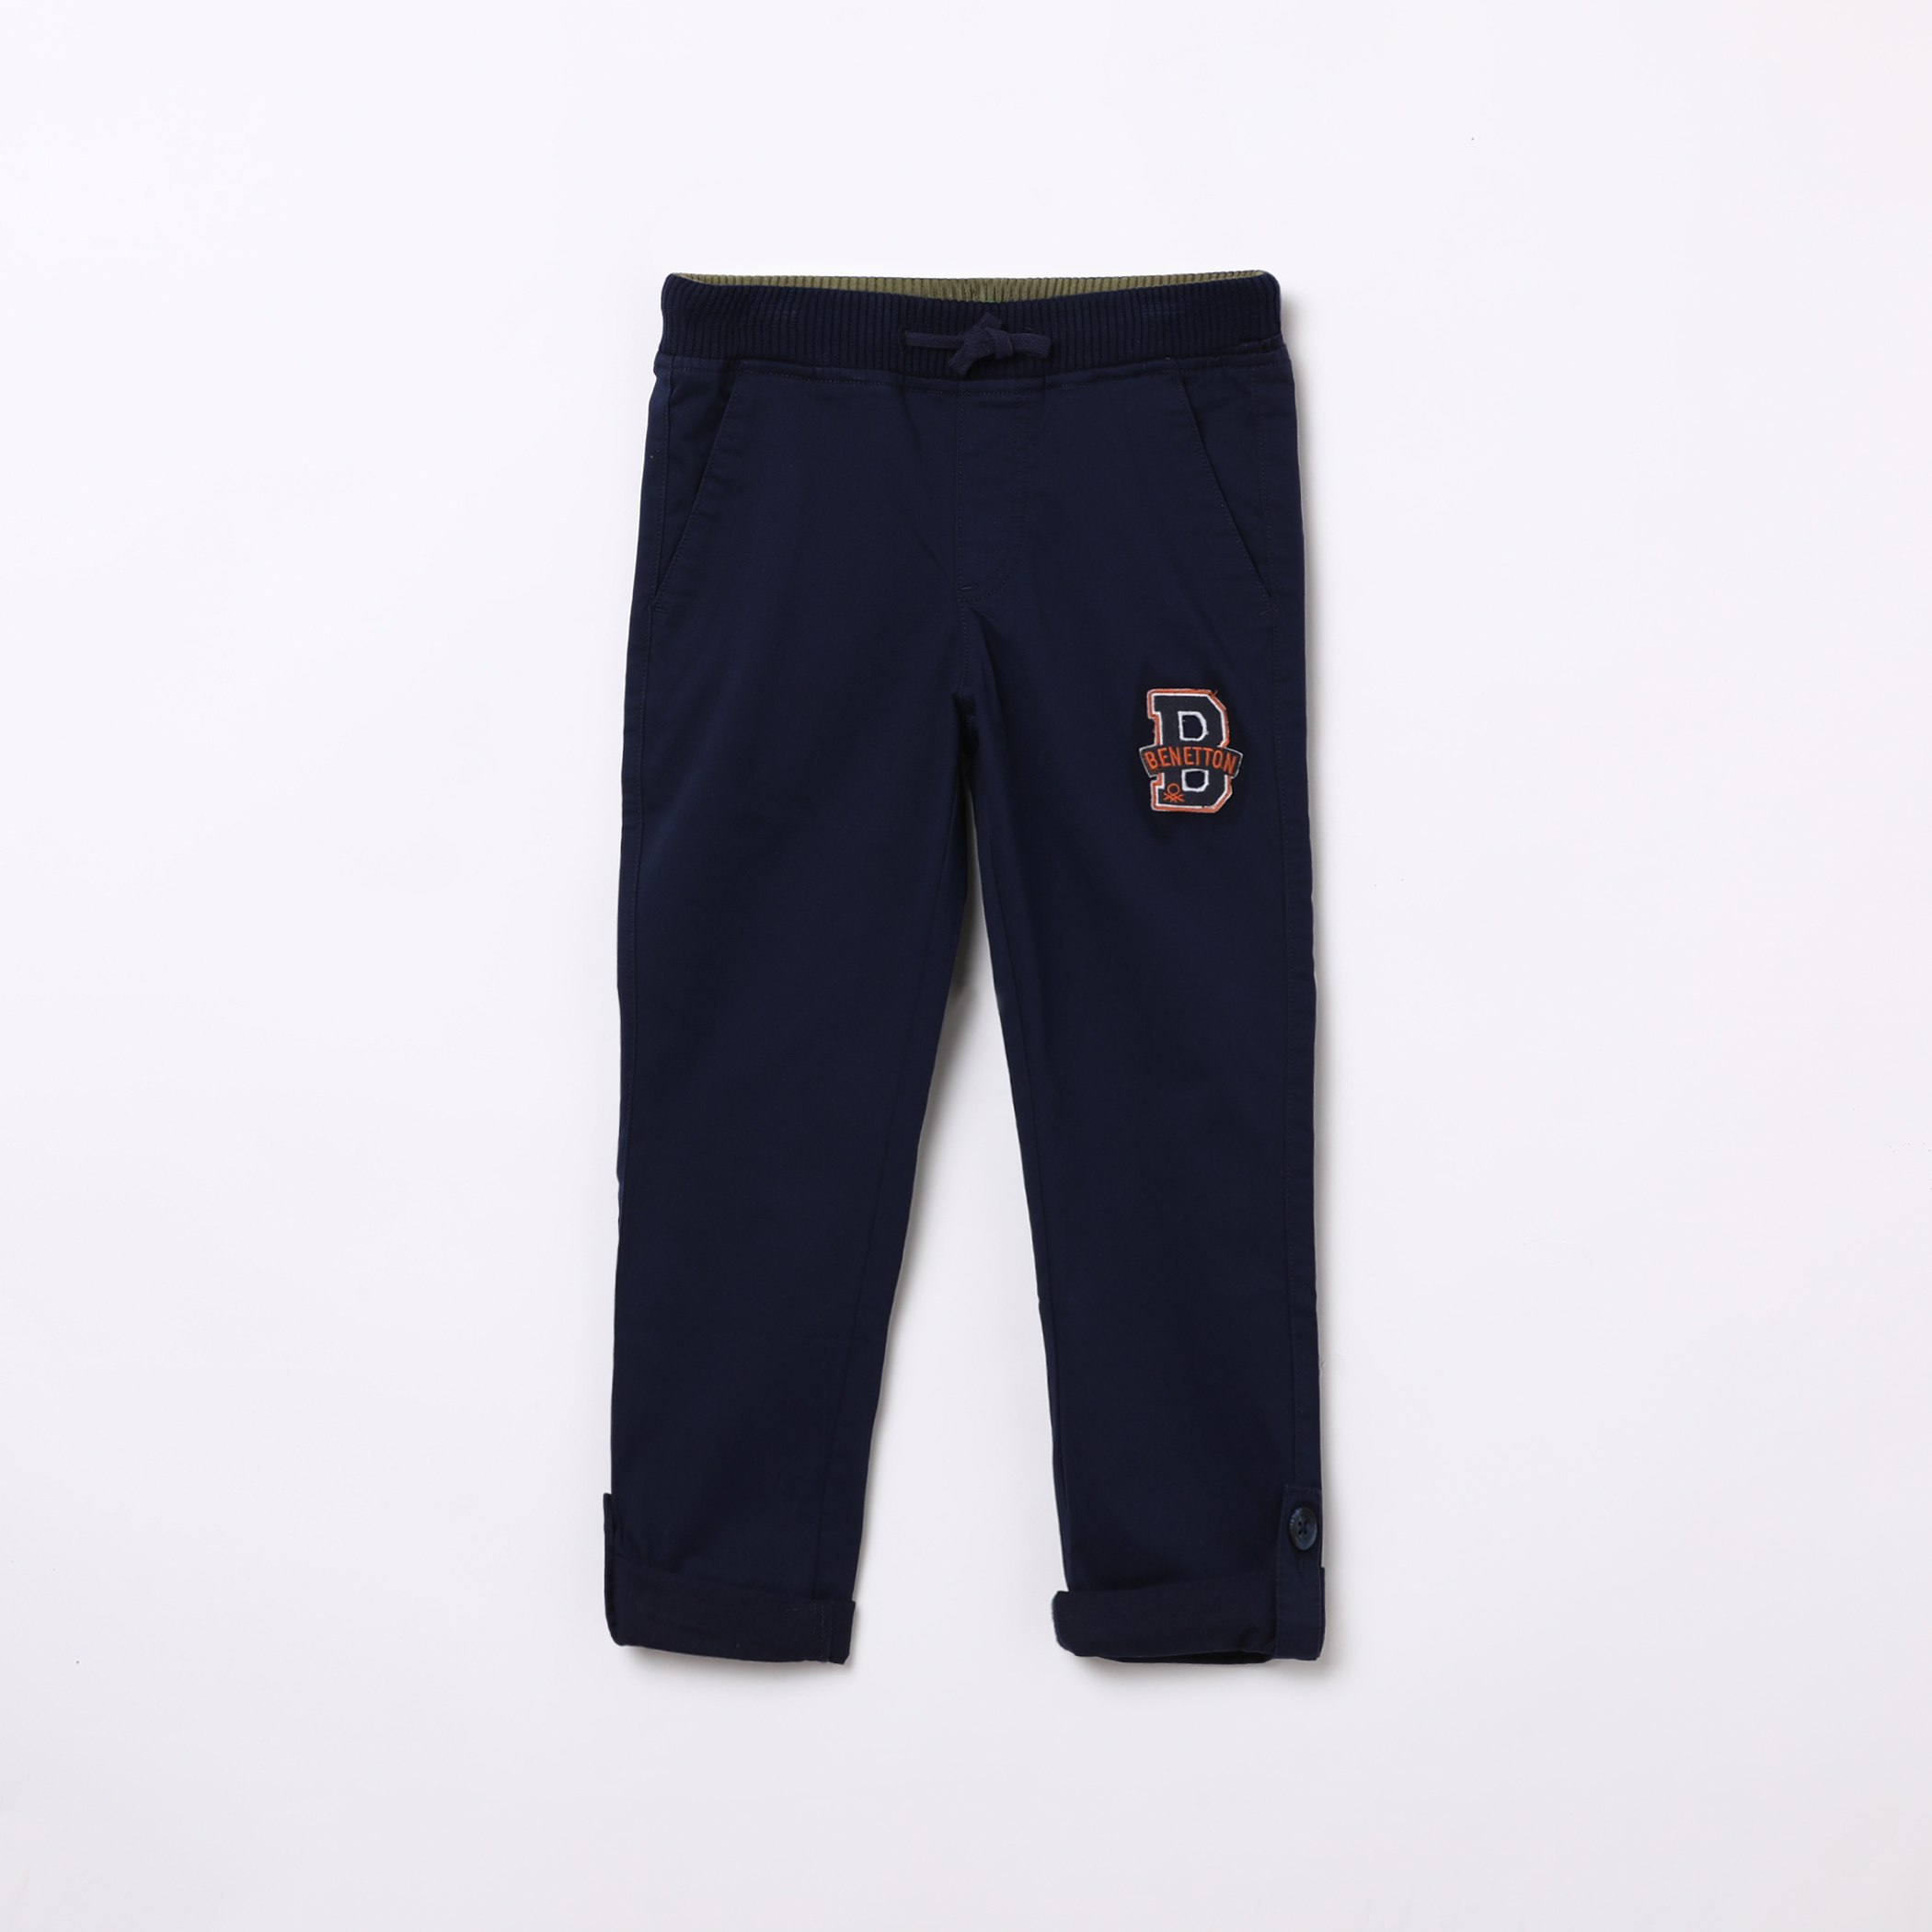 UNITED COLORS OF BENETTON Boys Solid Elasticated Track Pants